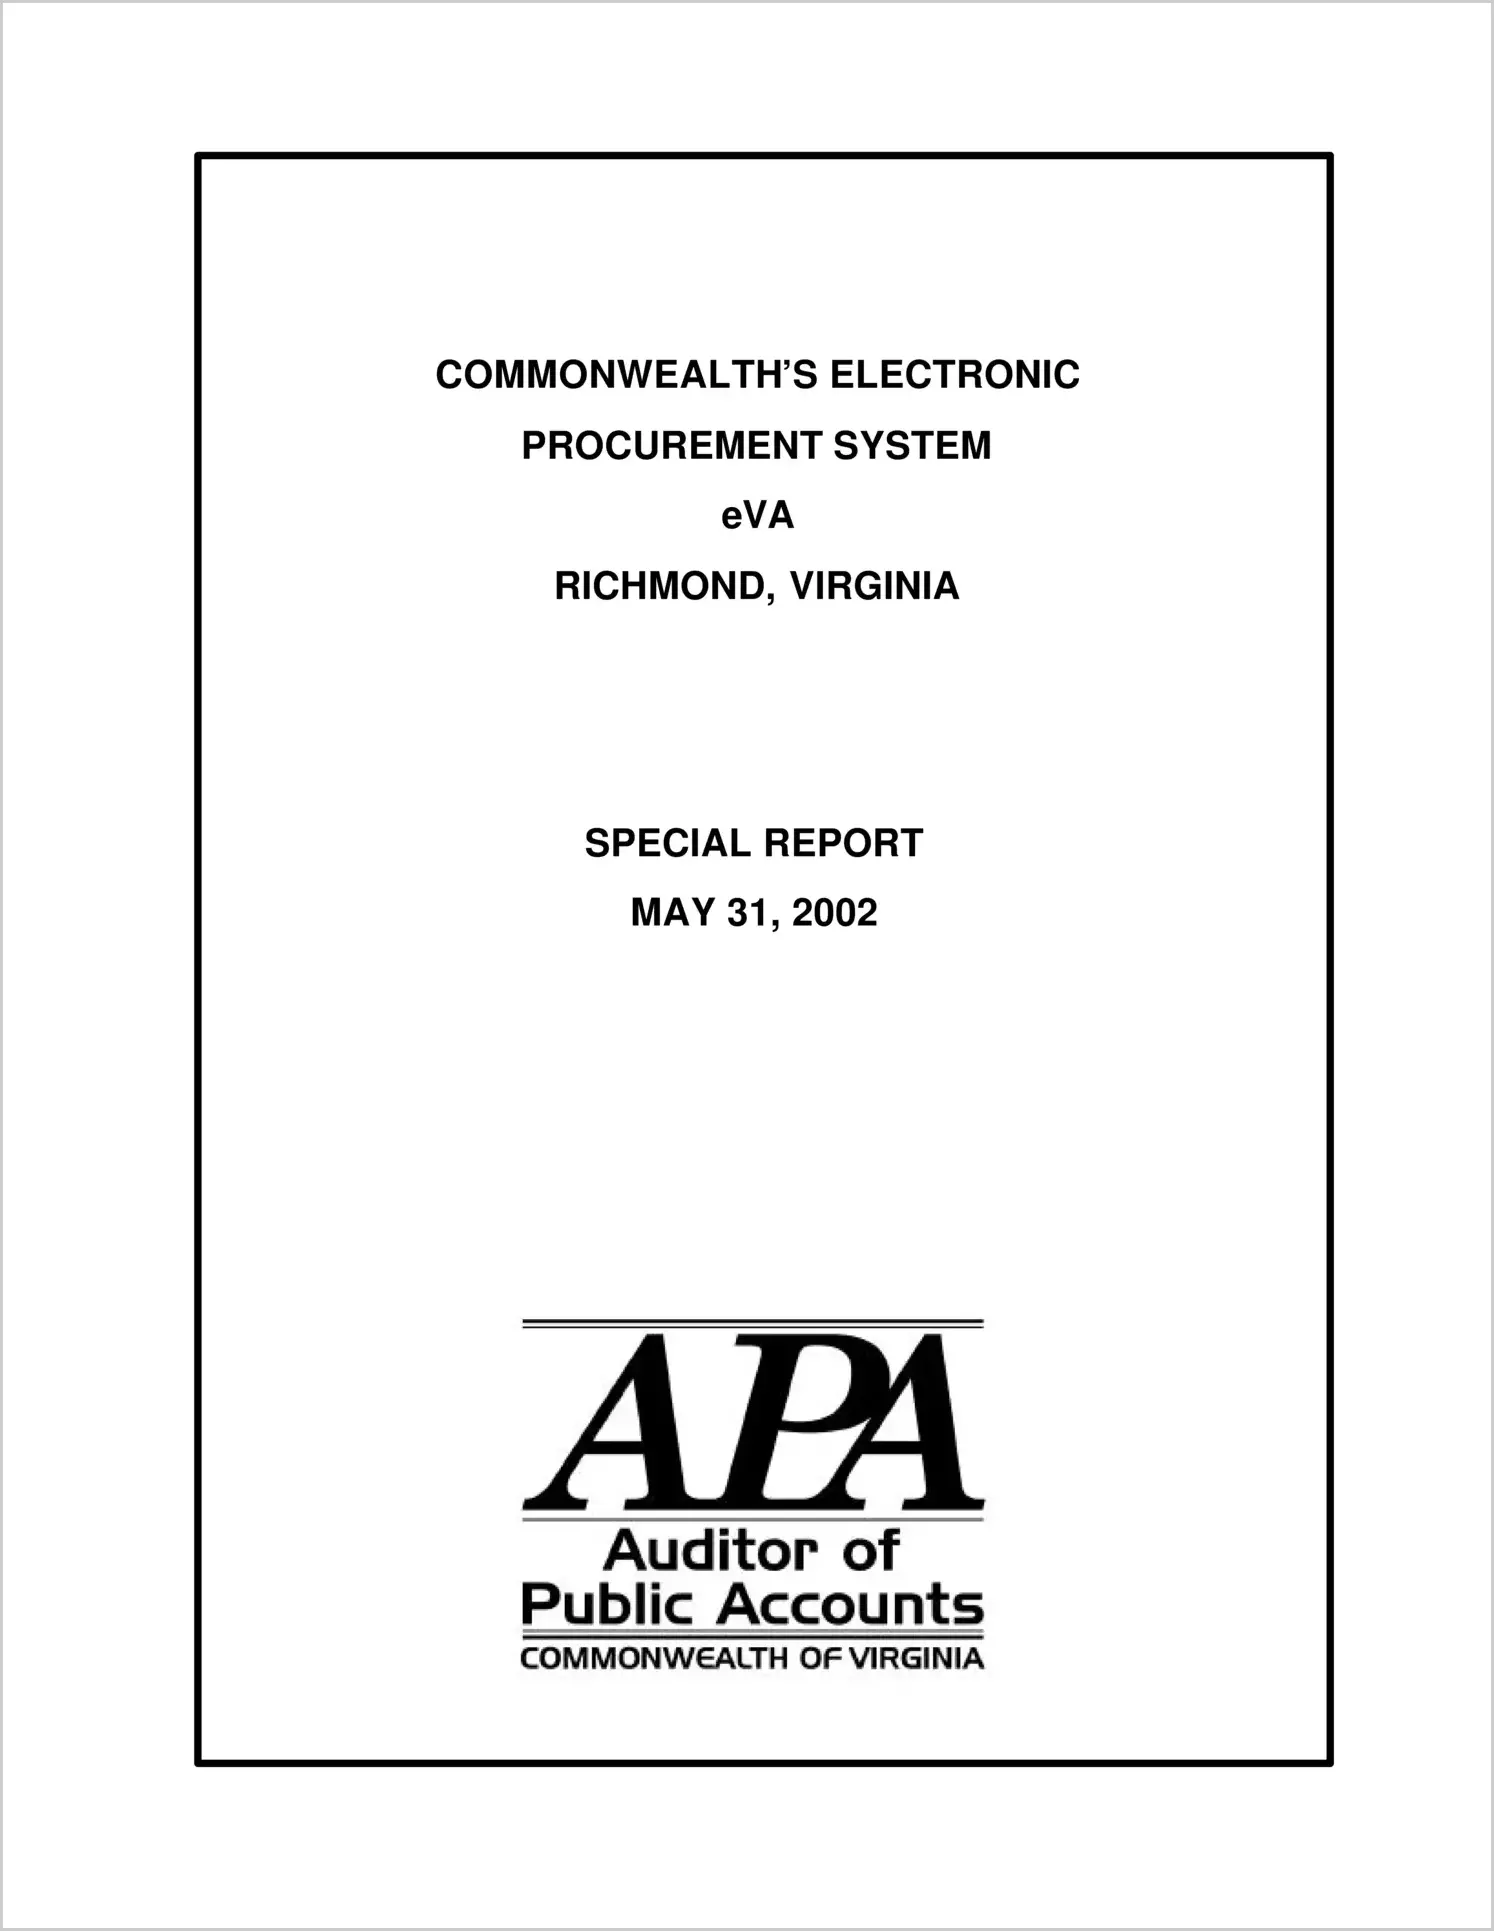 Special ReportCommonwealth`s Electronic Procurement System, eVA(Report Date: 5/31/2002)